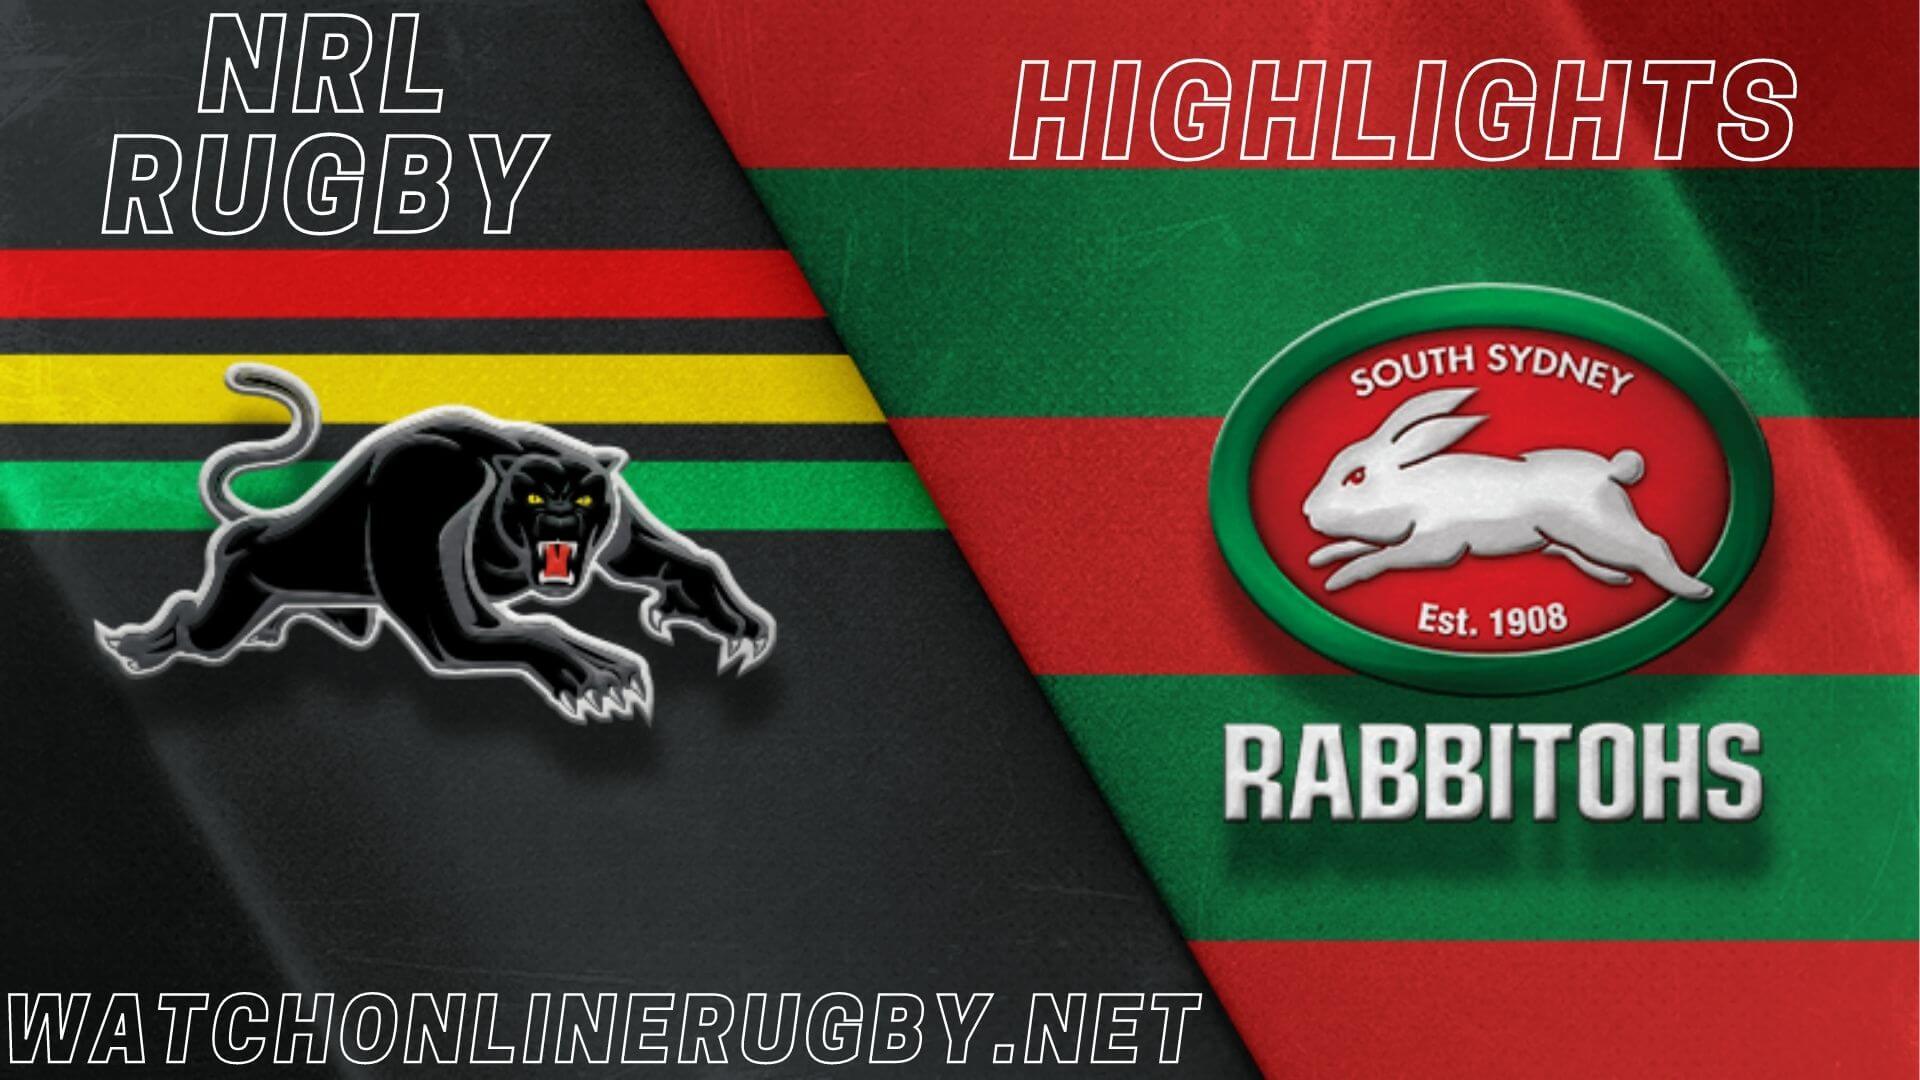 Rabbitohs Vs Panthers Highlights RD 23 NRL Rugby